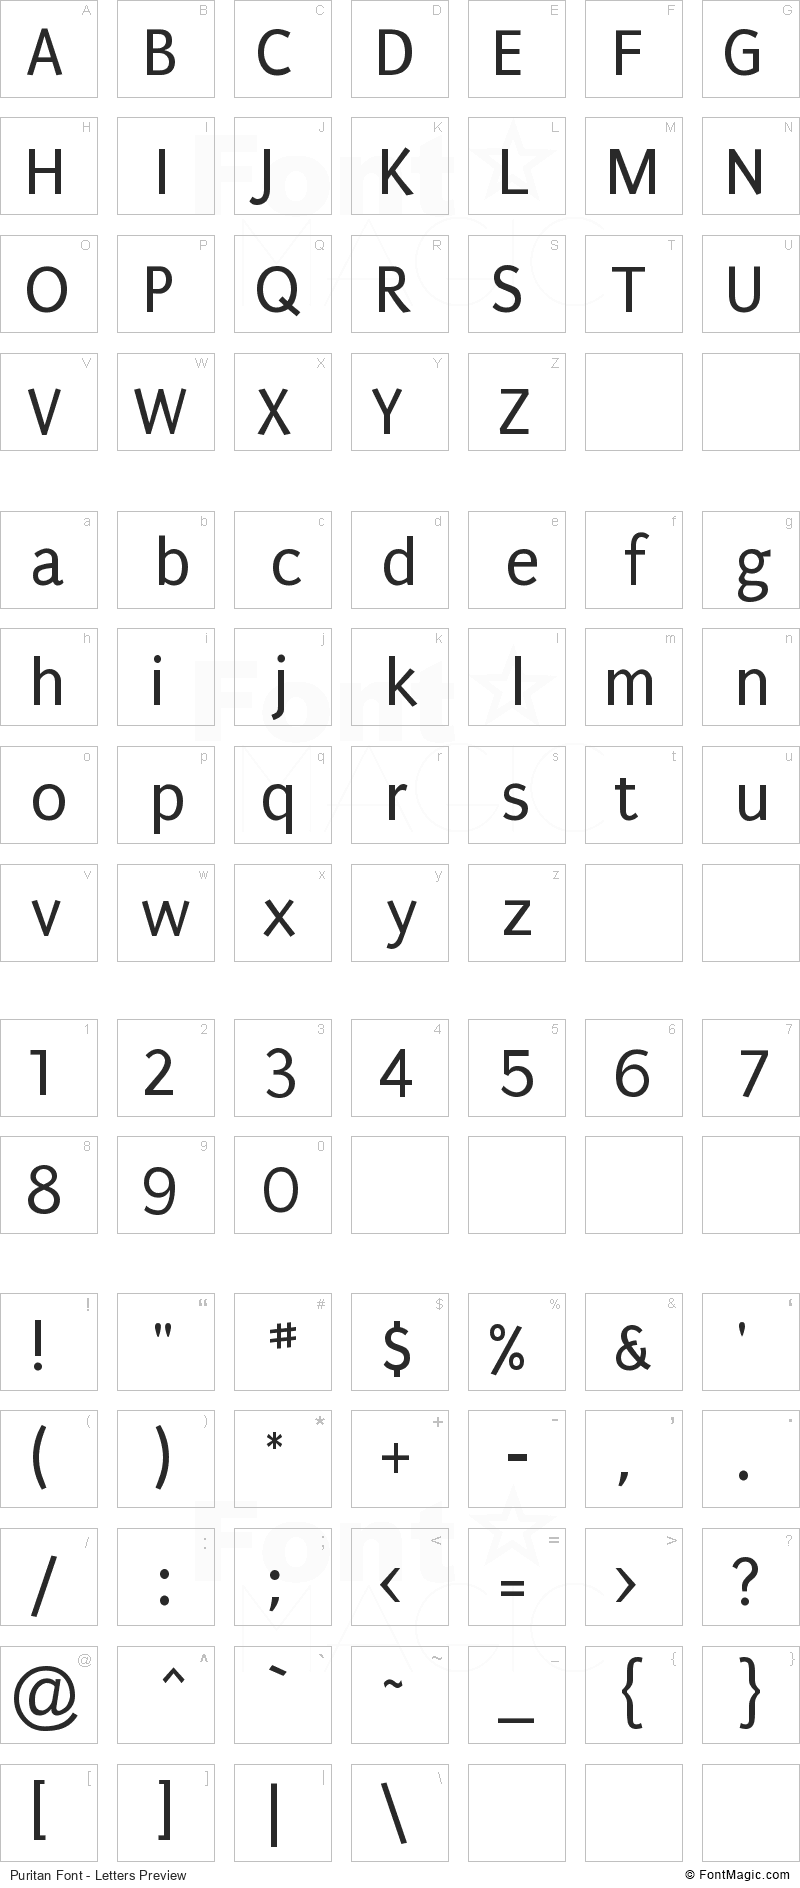 Puritan Font - All Latters Preview Chart